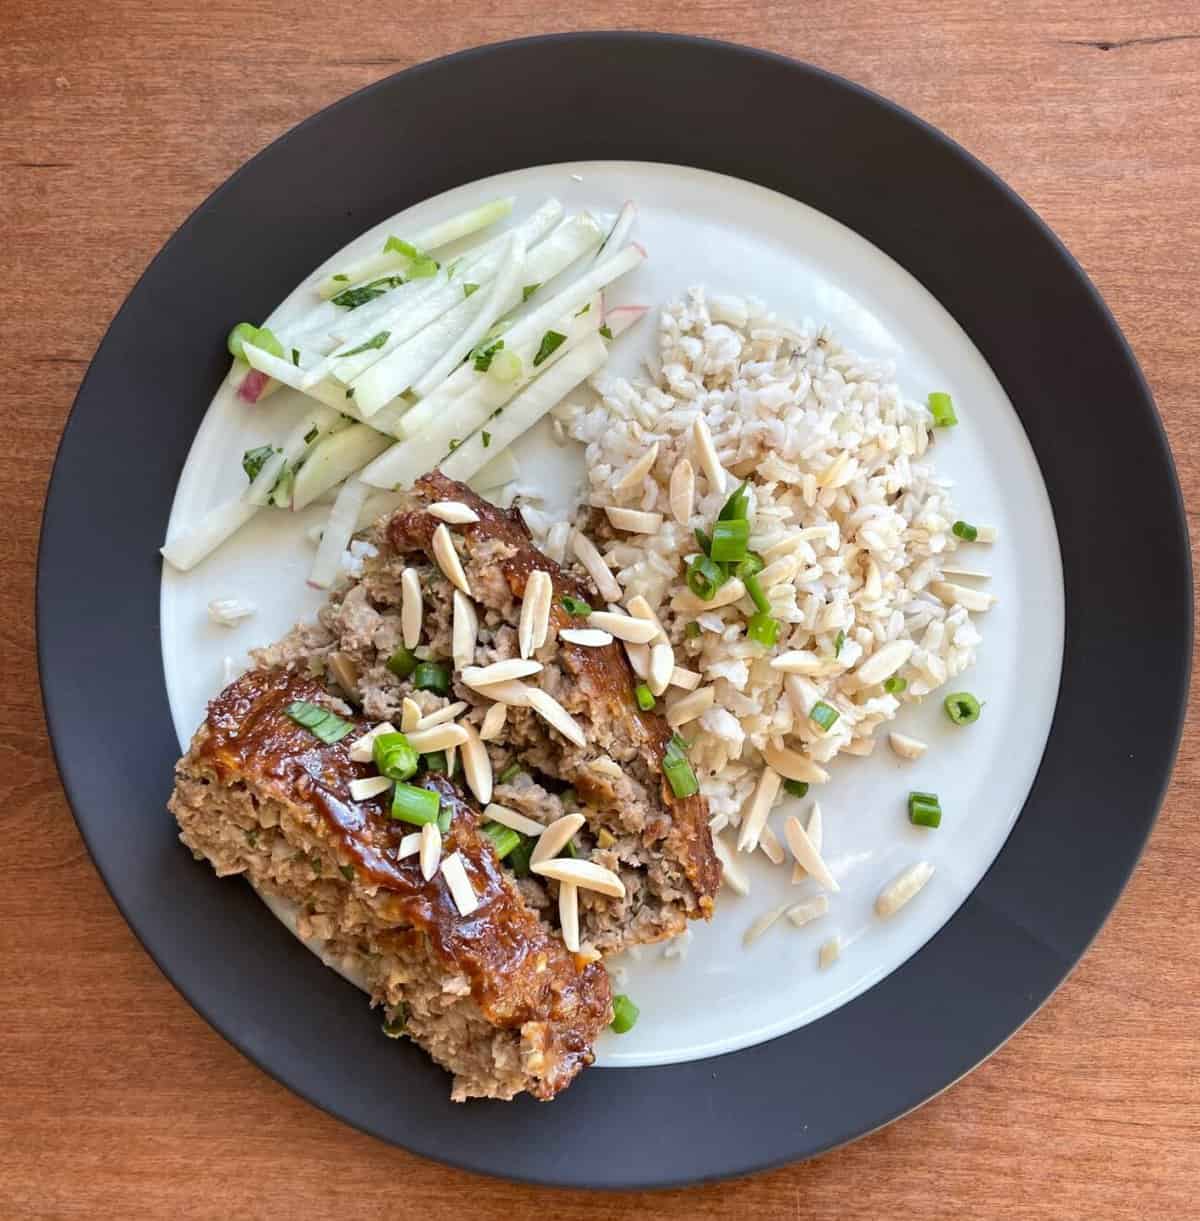 sliced duck meatloaf garnished with almonds, some rice, and kohlrabi coleslaw.